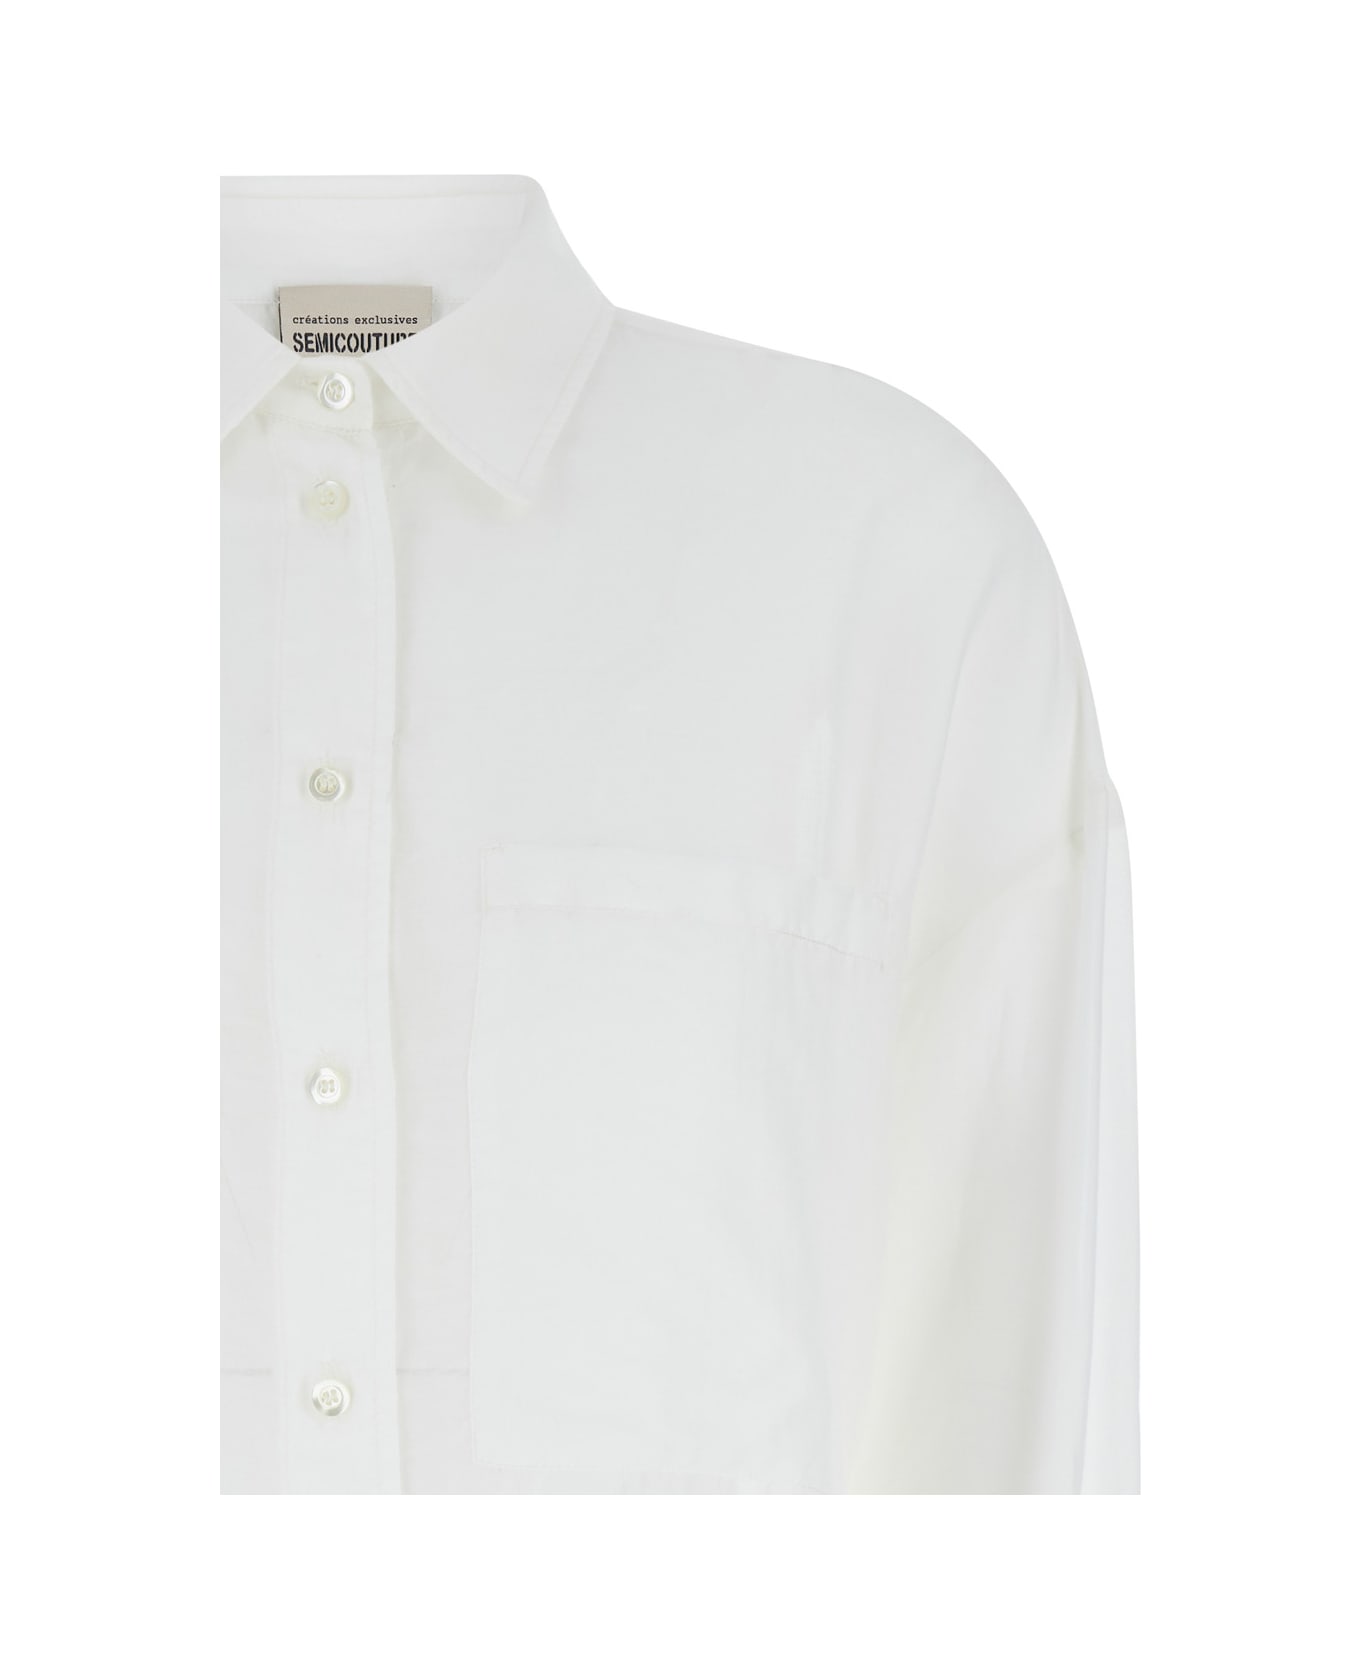 SEMICOUTURE White Classic Shirt In Cotton Blend Woman - White シャツ